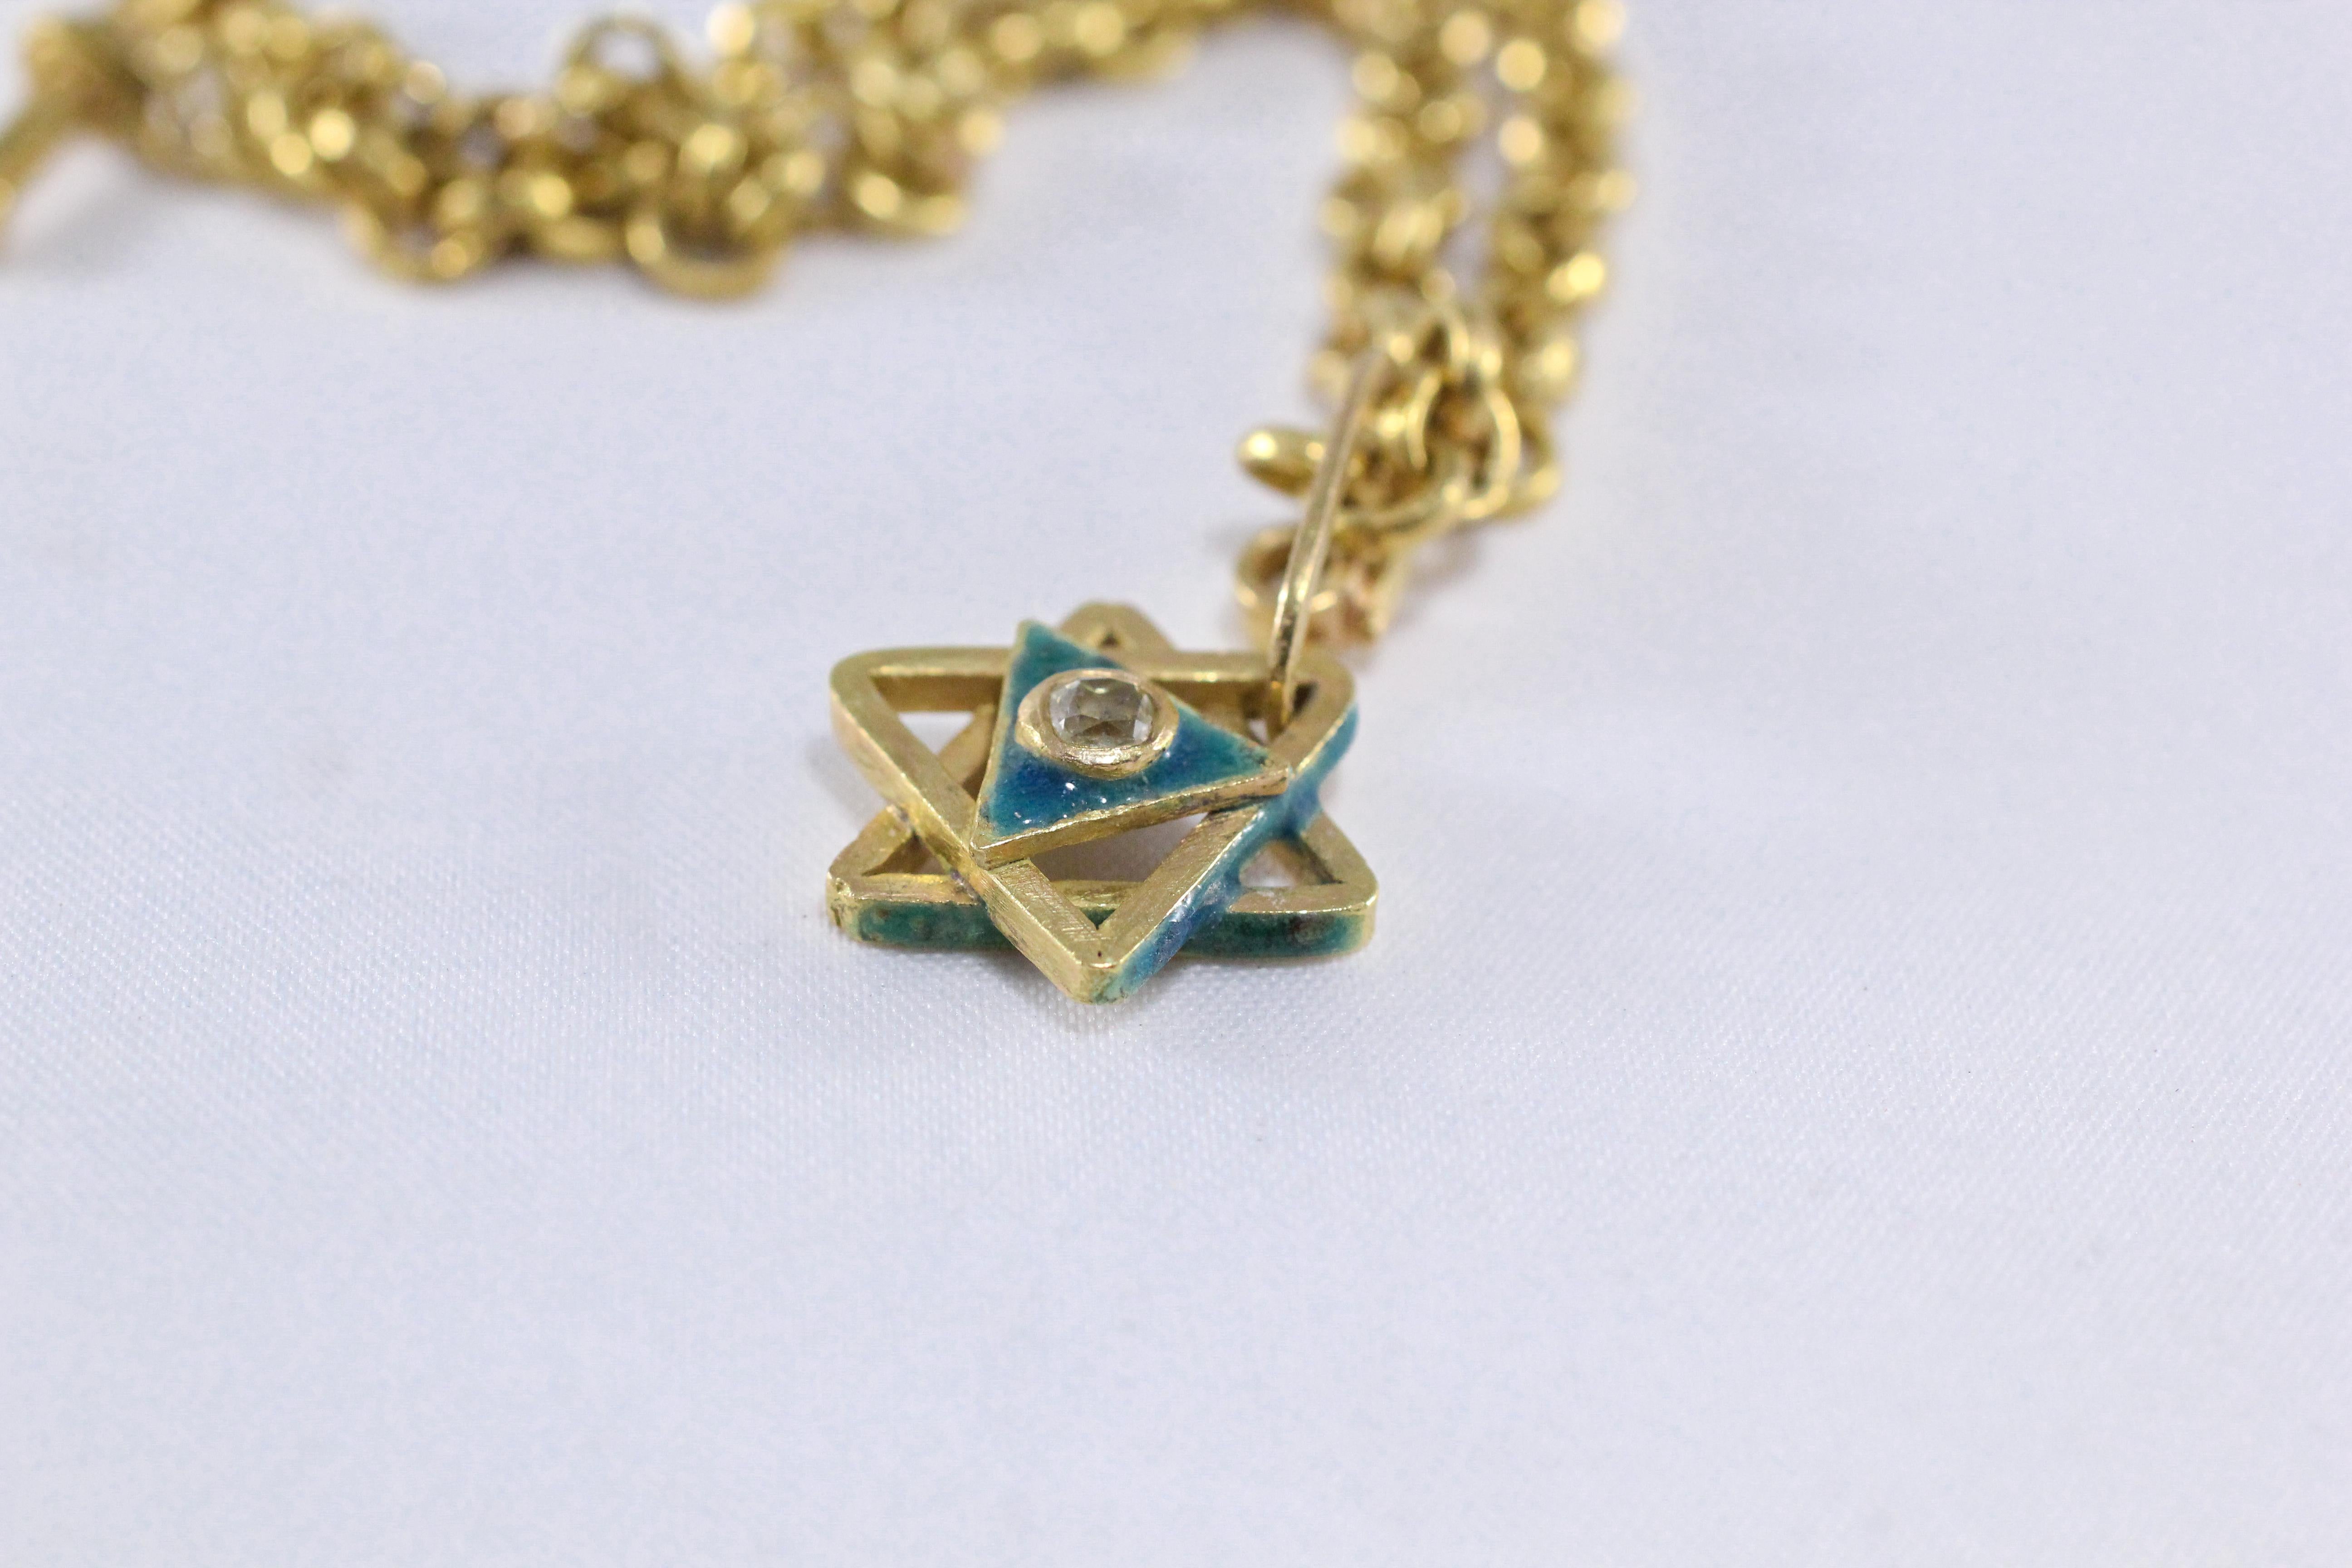 Enamel Magen David 18K Gold Chain Necklace Diamond Enhancer and Toggle Clasp For Sale 5